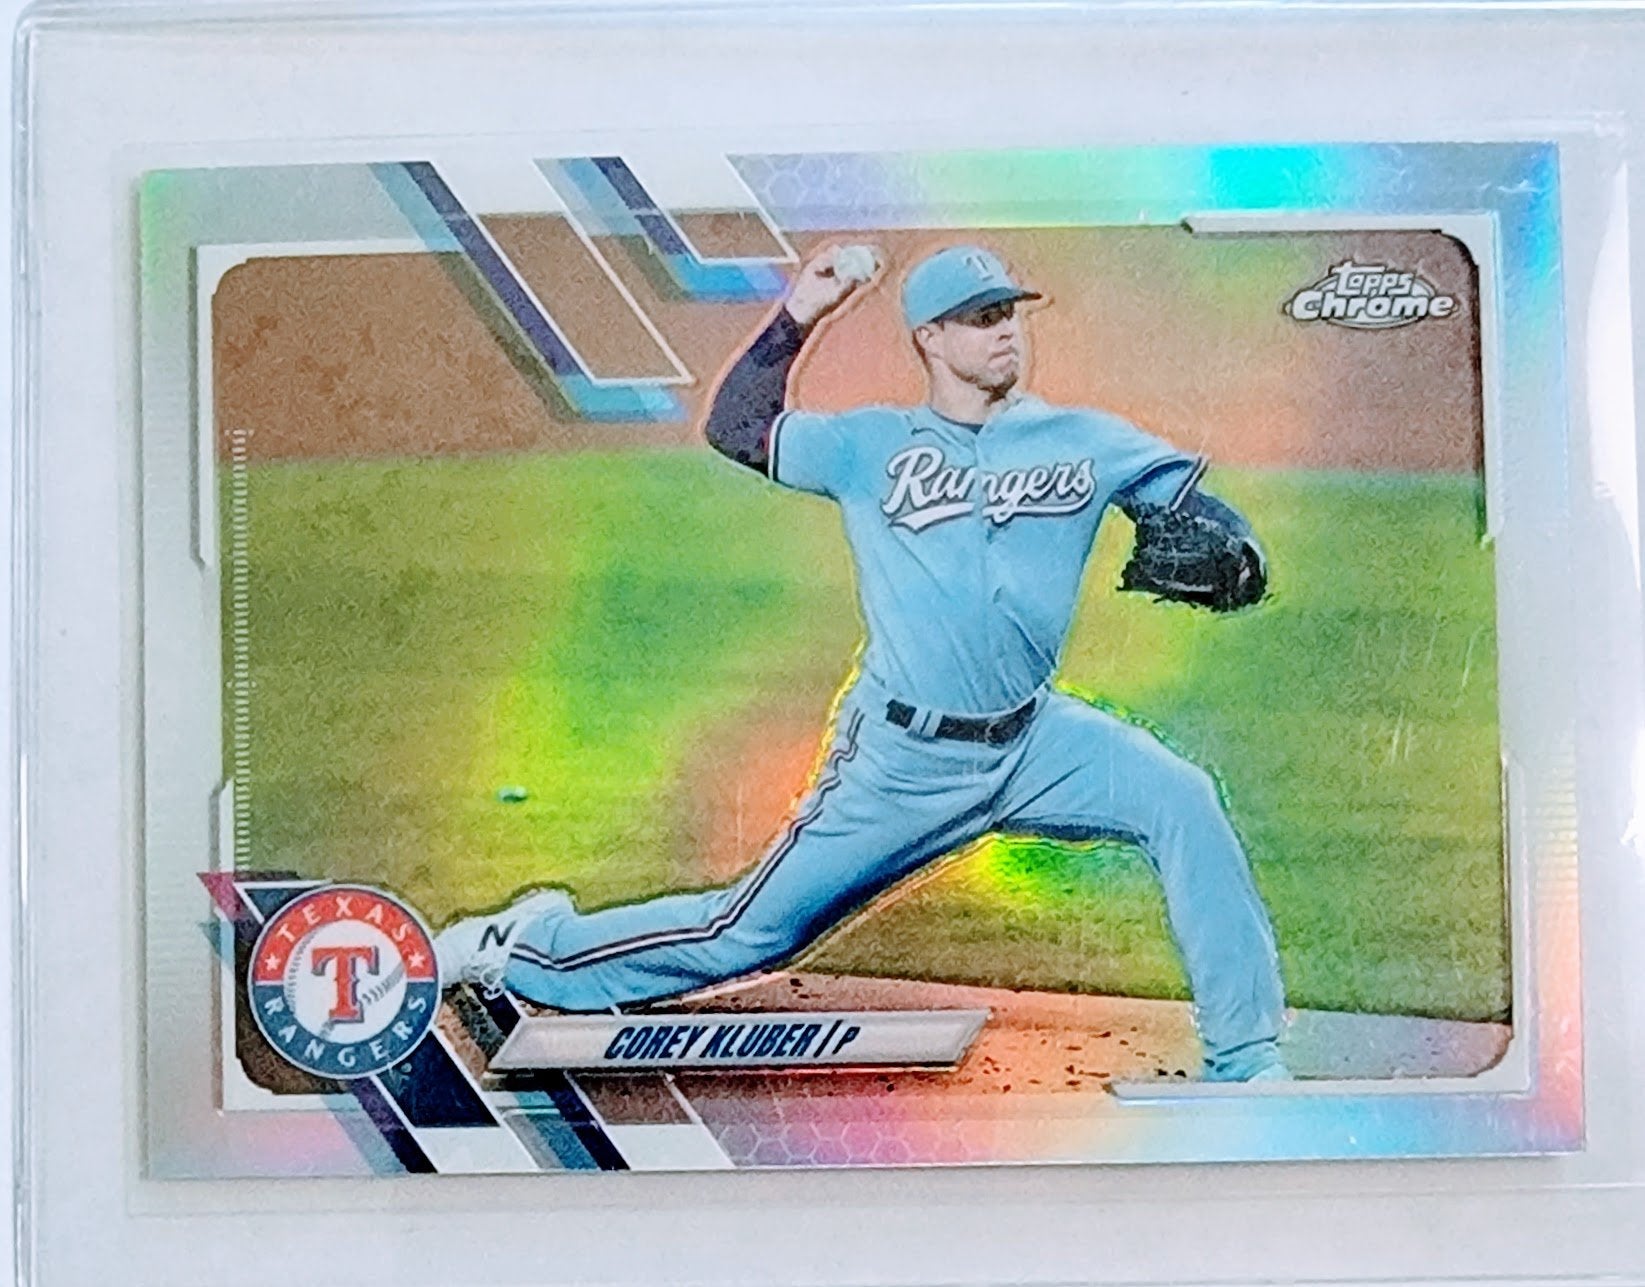 2021 Topps Chrome Corey Kluber Refractor Baseball Card TPTV simple Xclusive Collectibles   